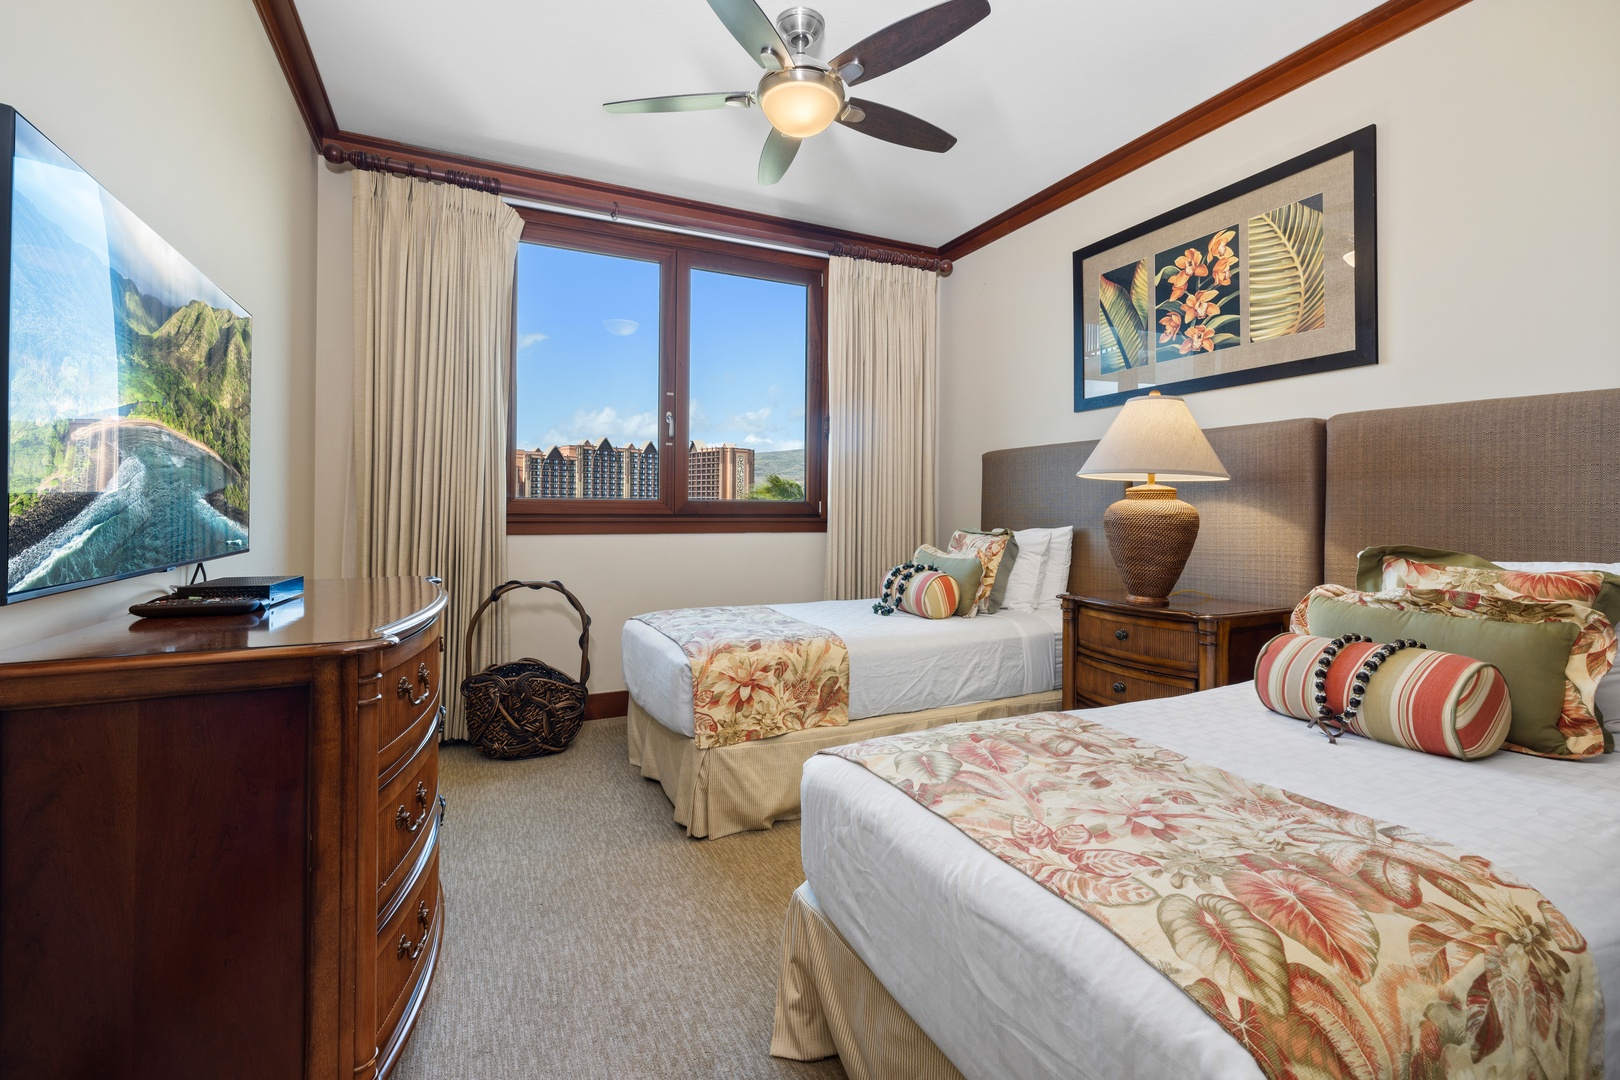 Kapolei Vacation Rentals, Ko Olina Beach Villas B602 - The second guest bedroom has extra long twin beds that can be converted to a king bed.